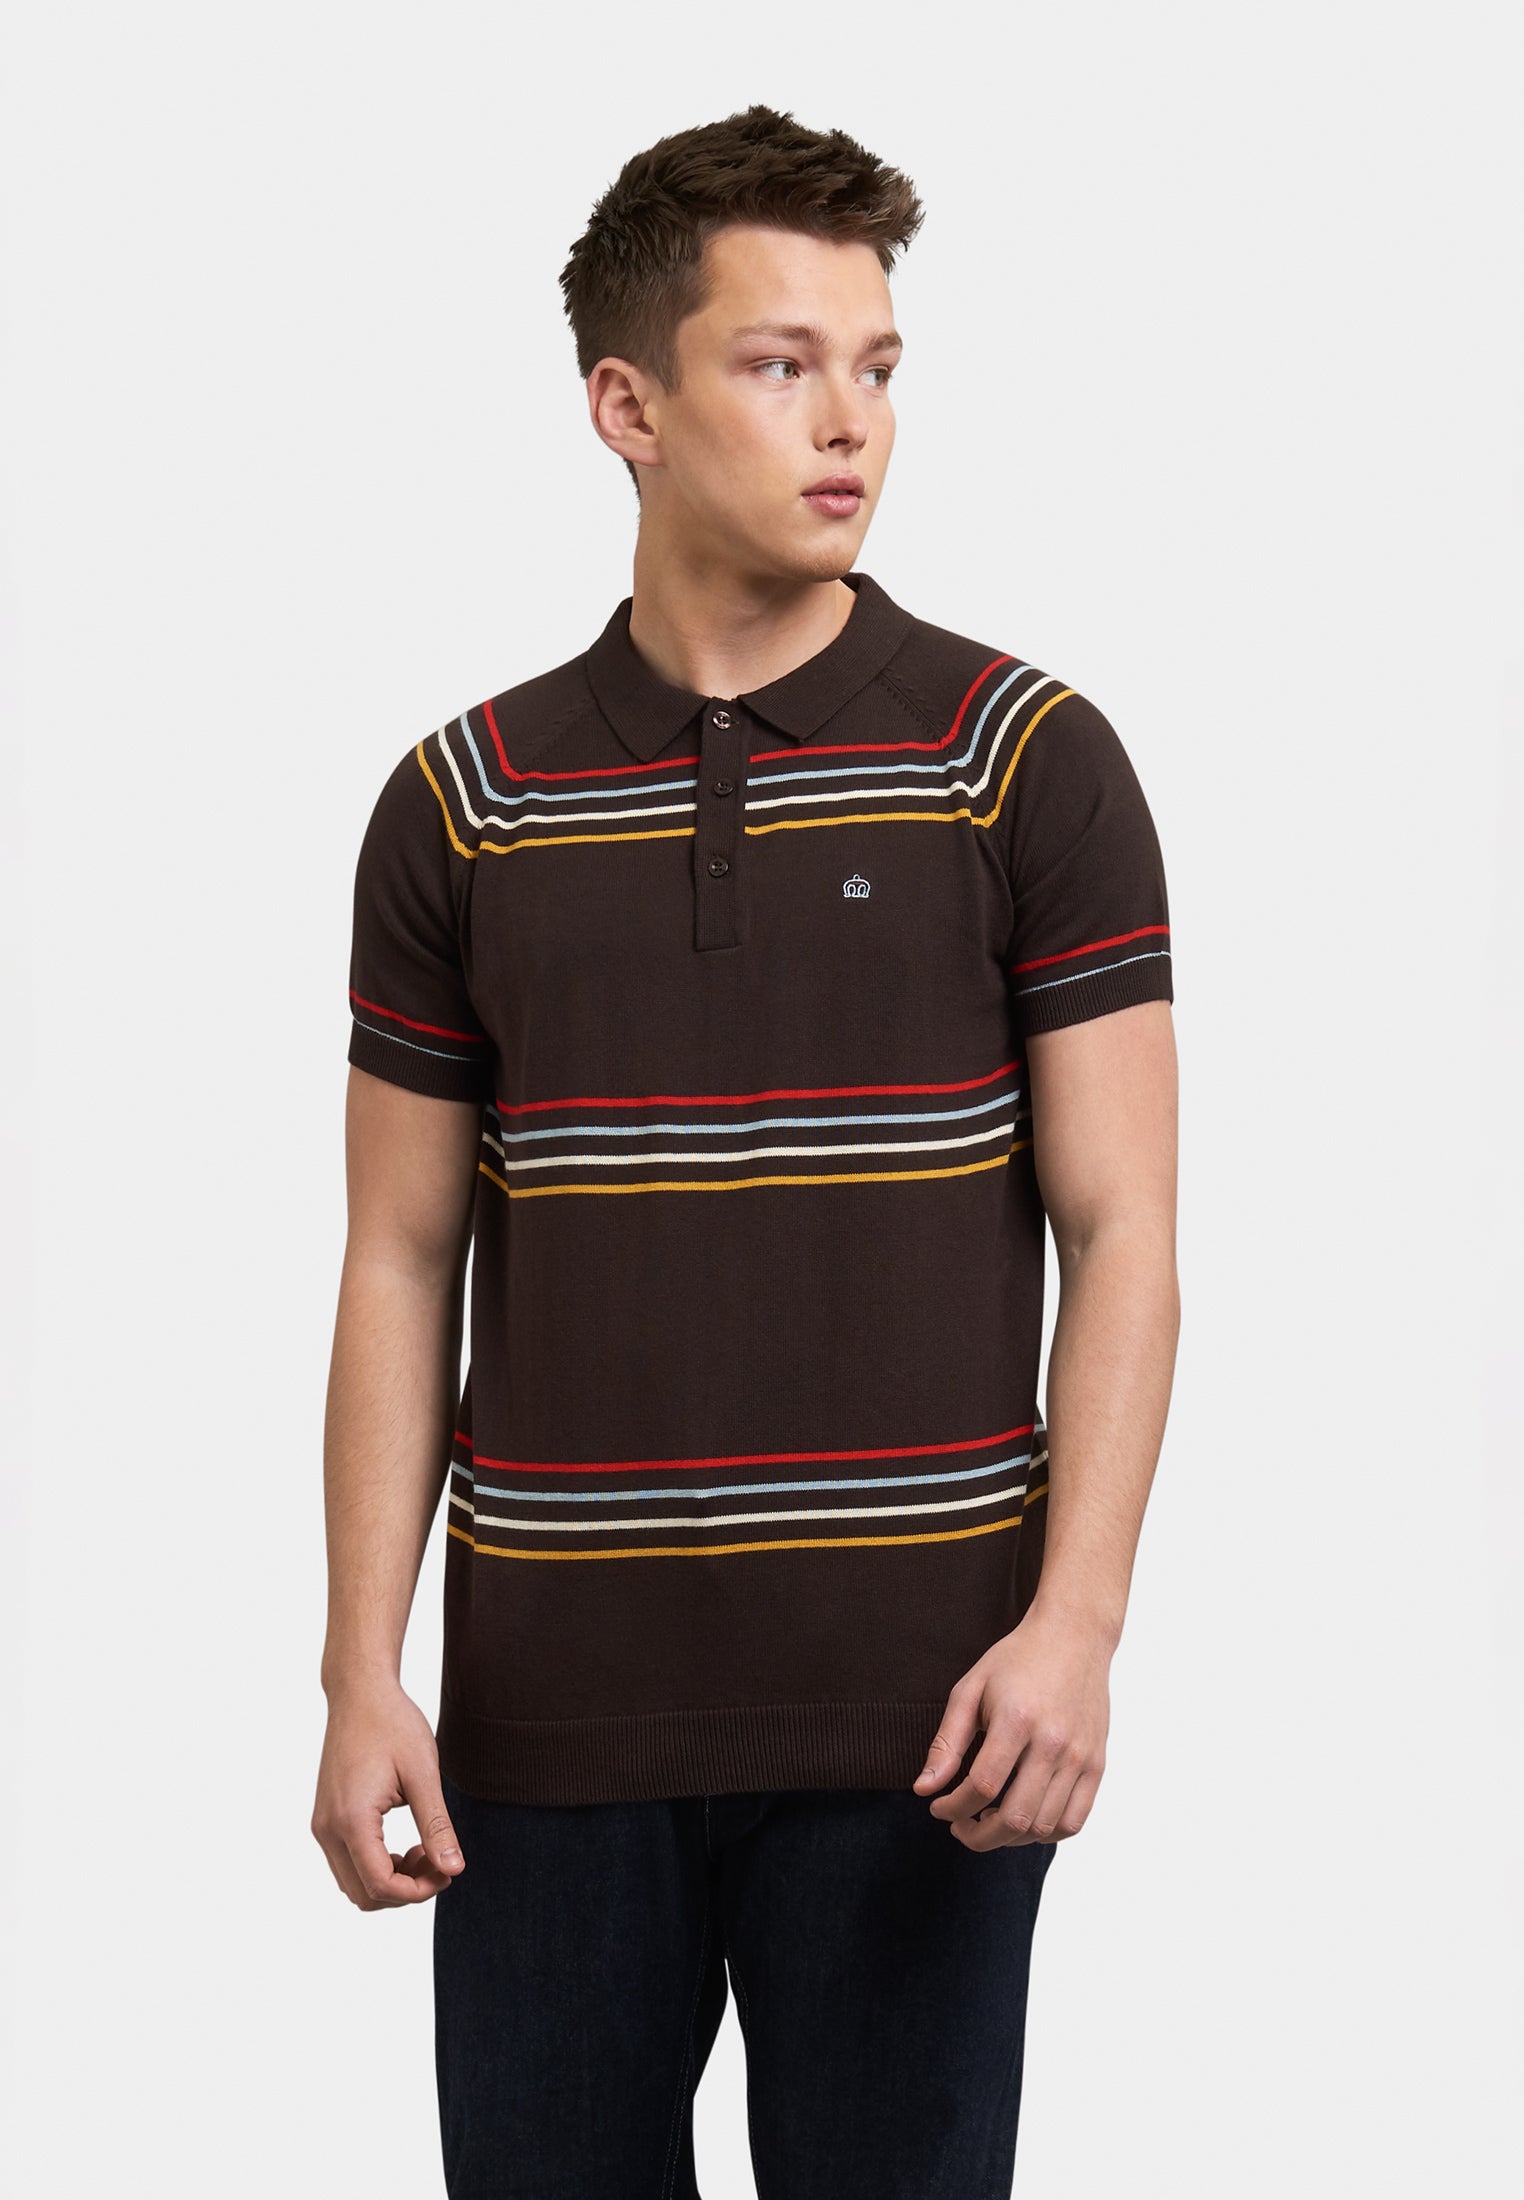 Madison Stripes Knitted Polo Shirt Front - Merc London